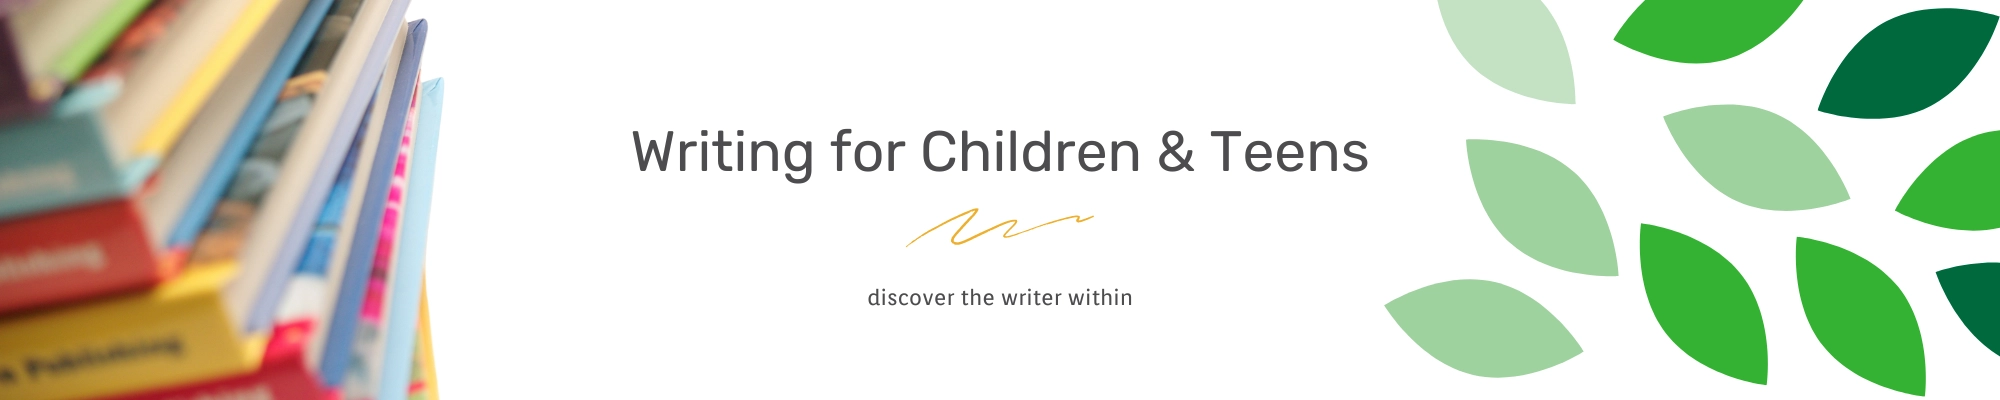 Writing For Children & Teens. Discover the writer within